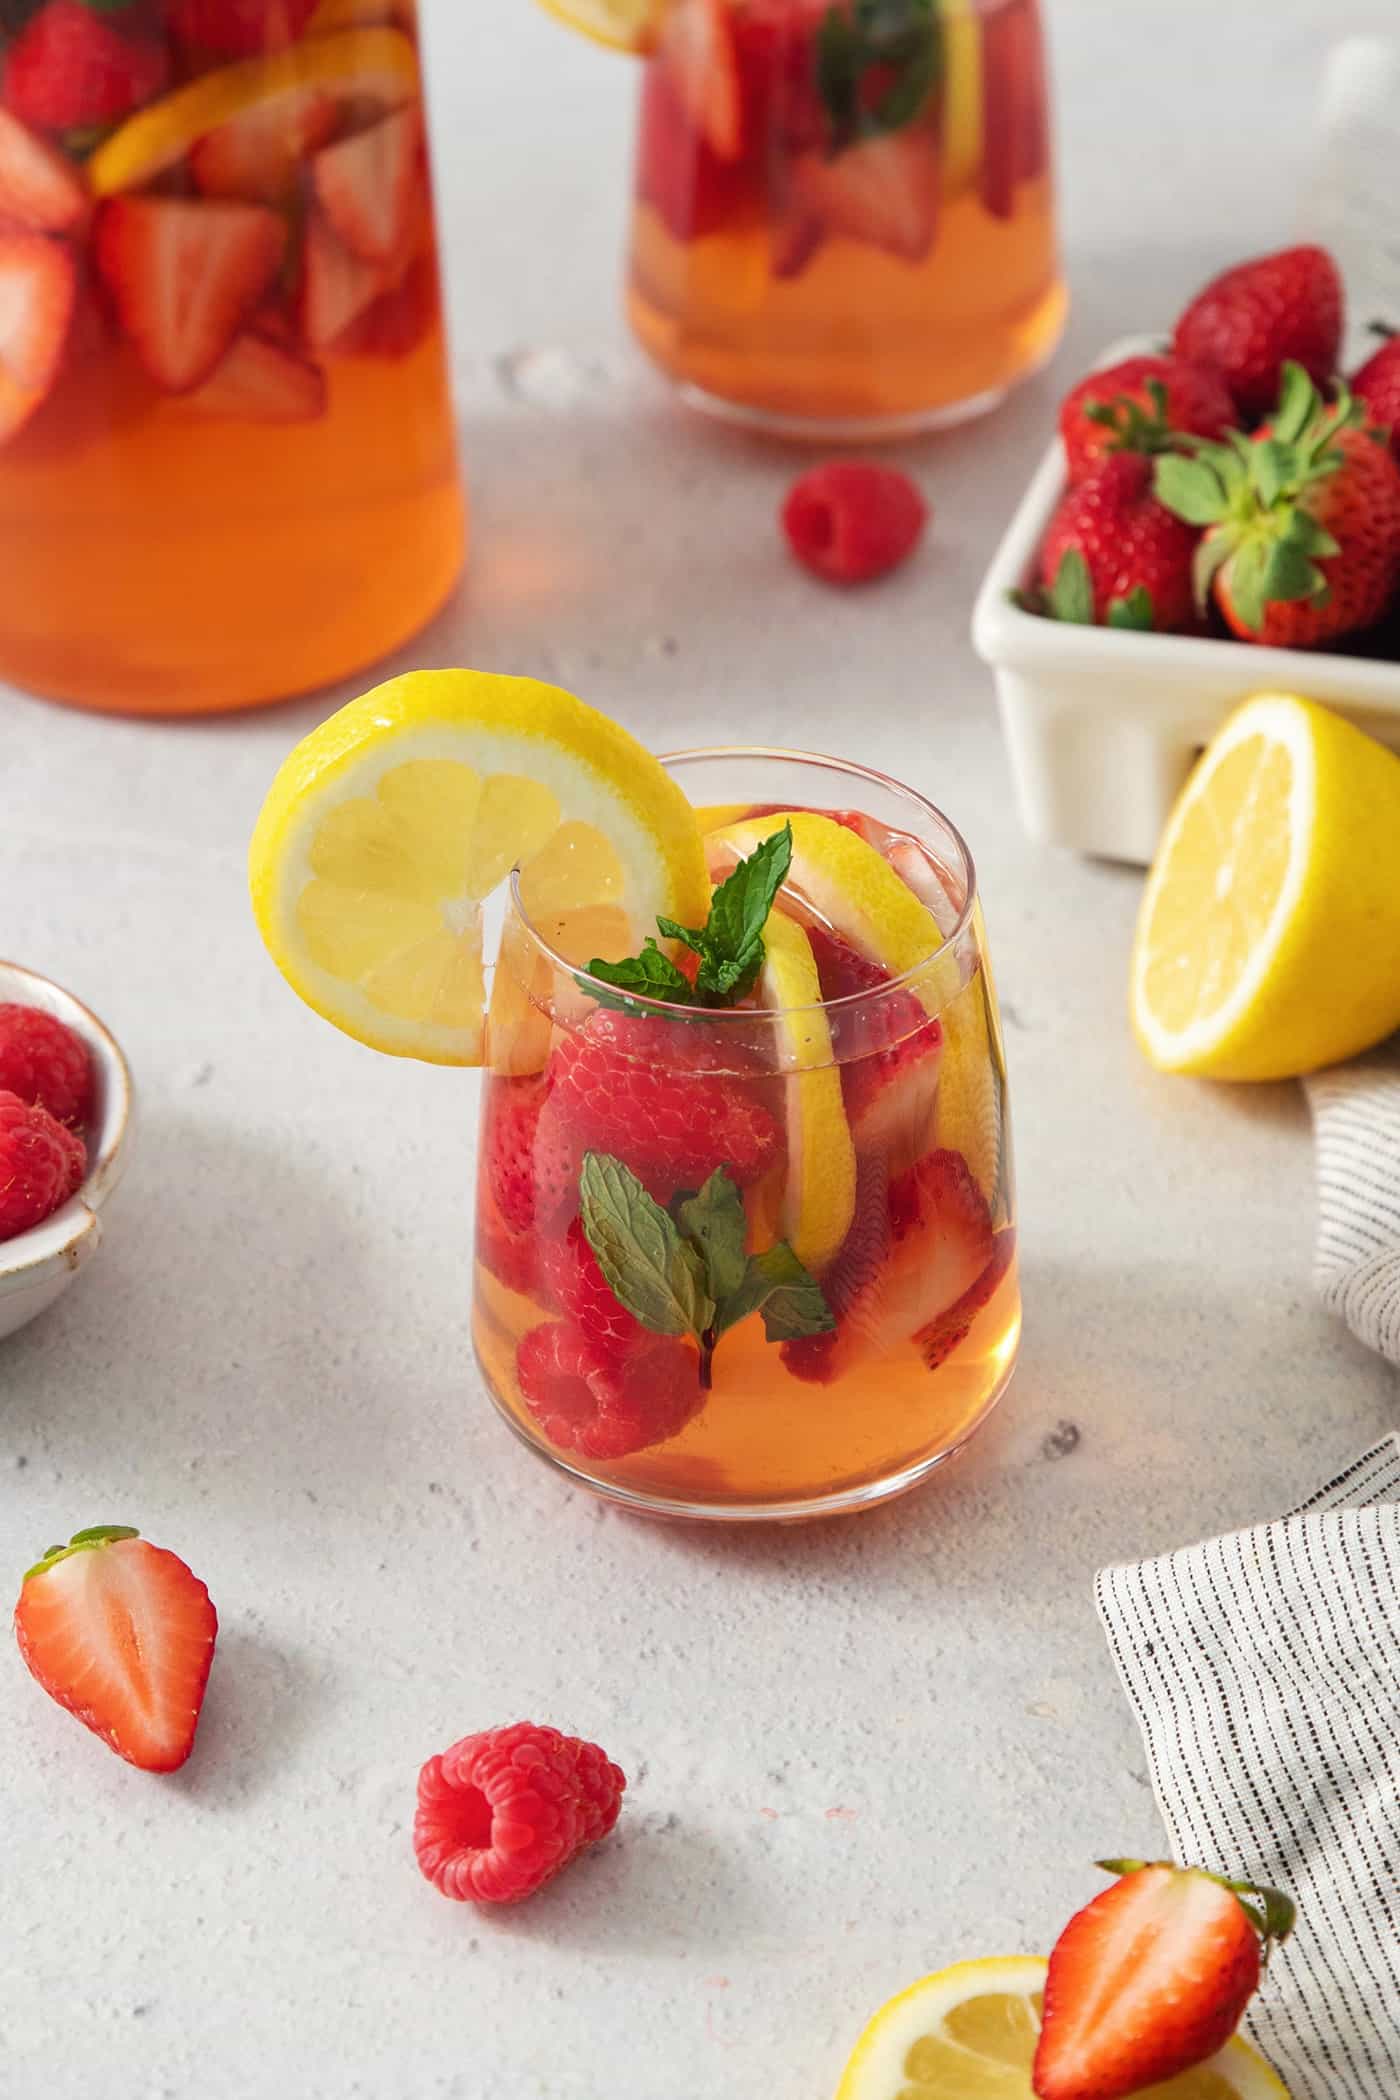 A glass of rose sangria is seen on a table garnished with a lemon.